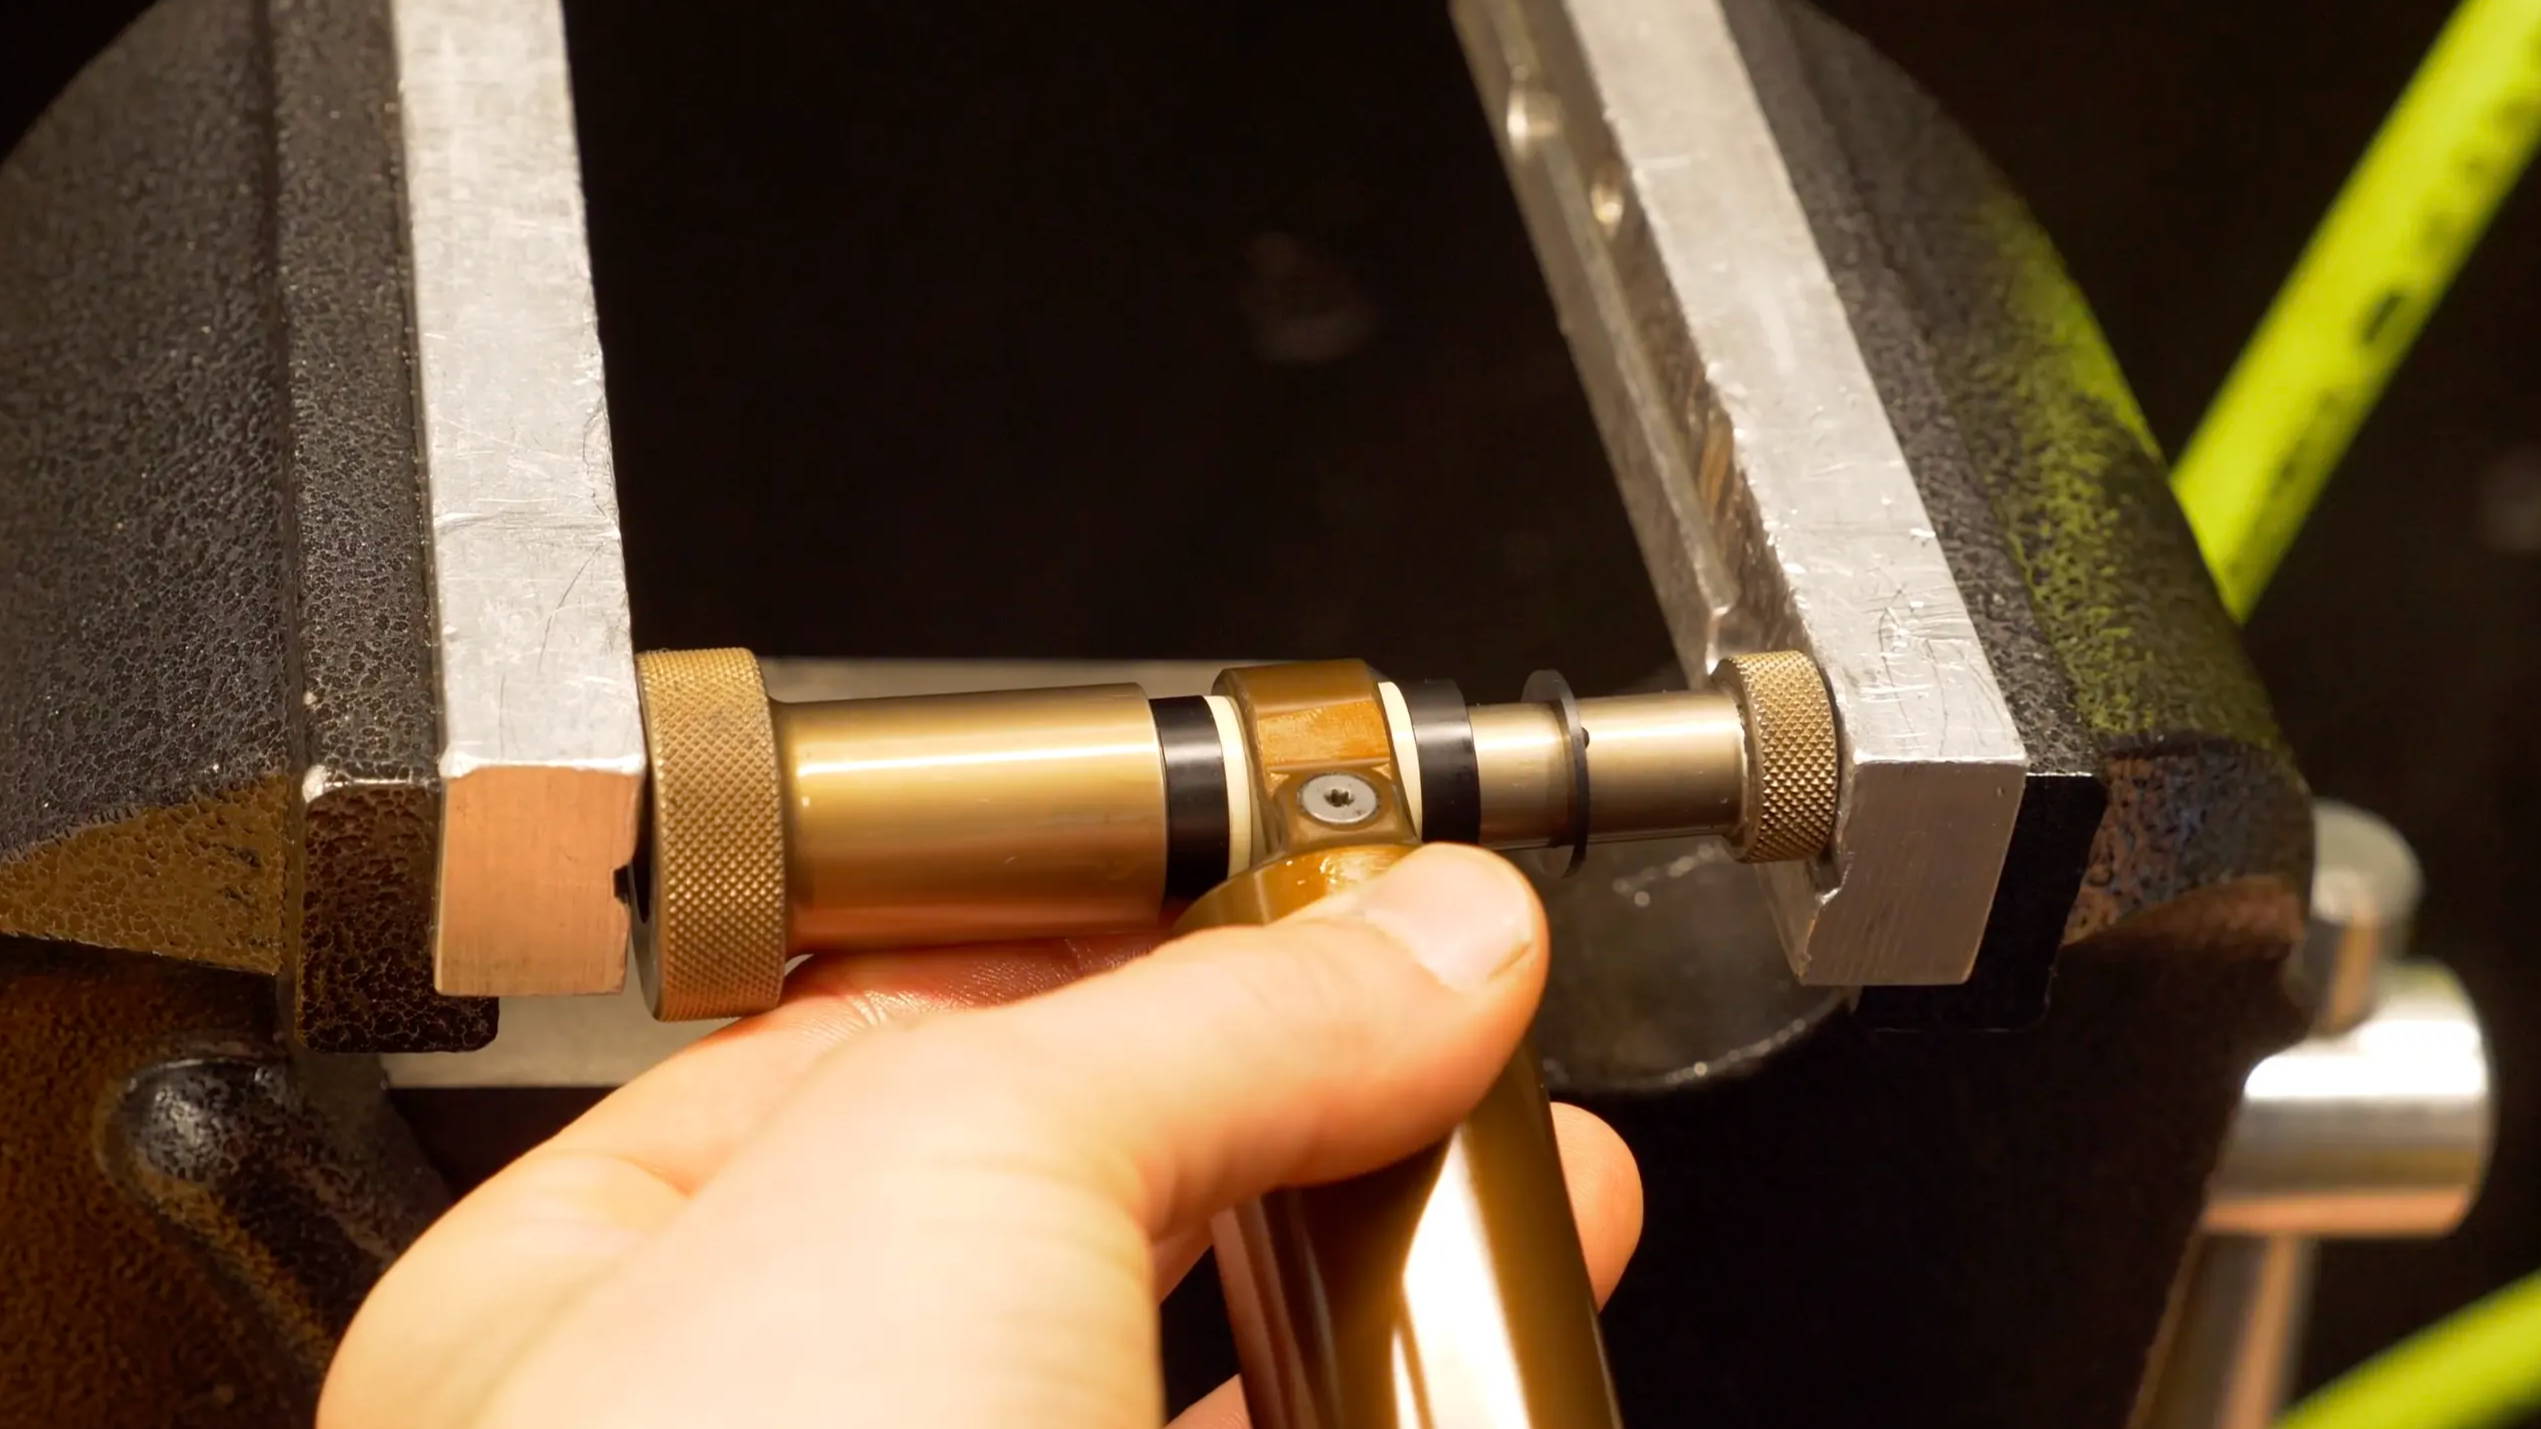 Removing the hardware with a proper hardware removal tool in a vice